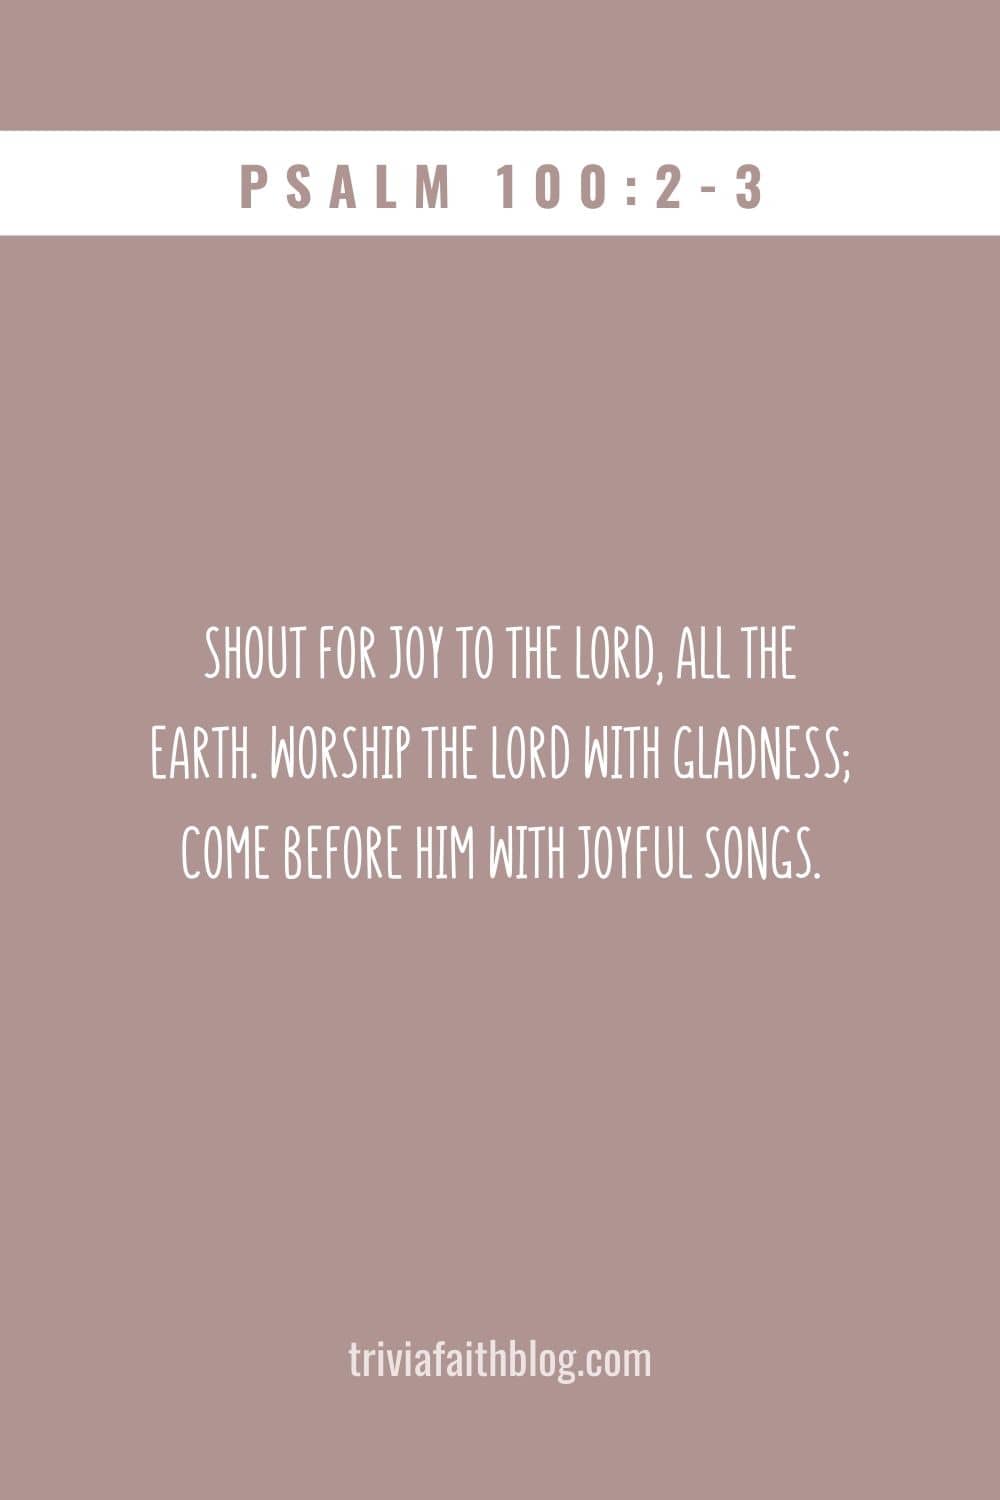 Shout for joy to the LORD, all the earth. Worship the LORD with gladness; come before him with joyful songs